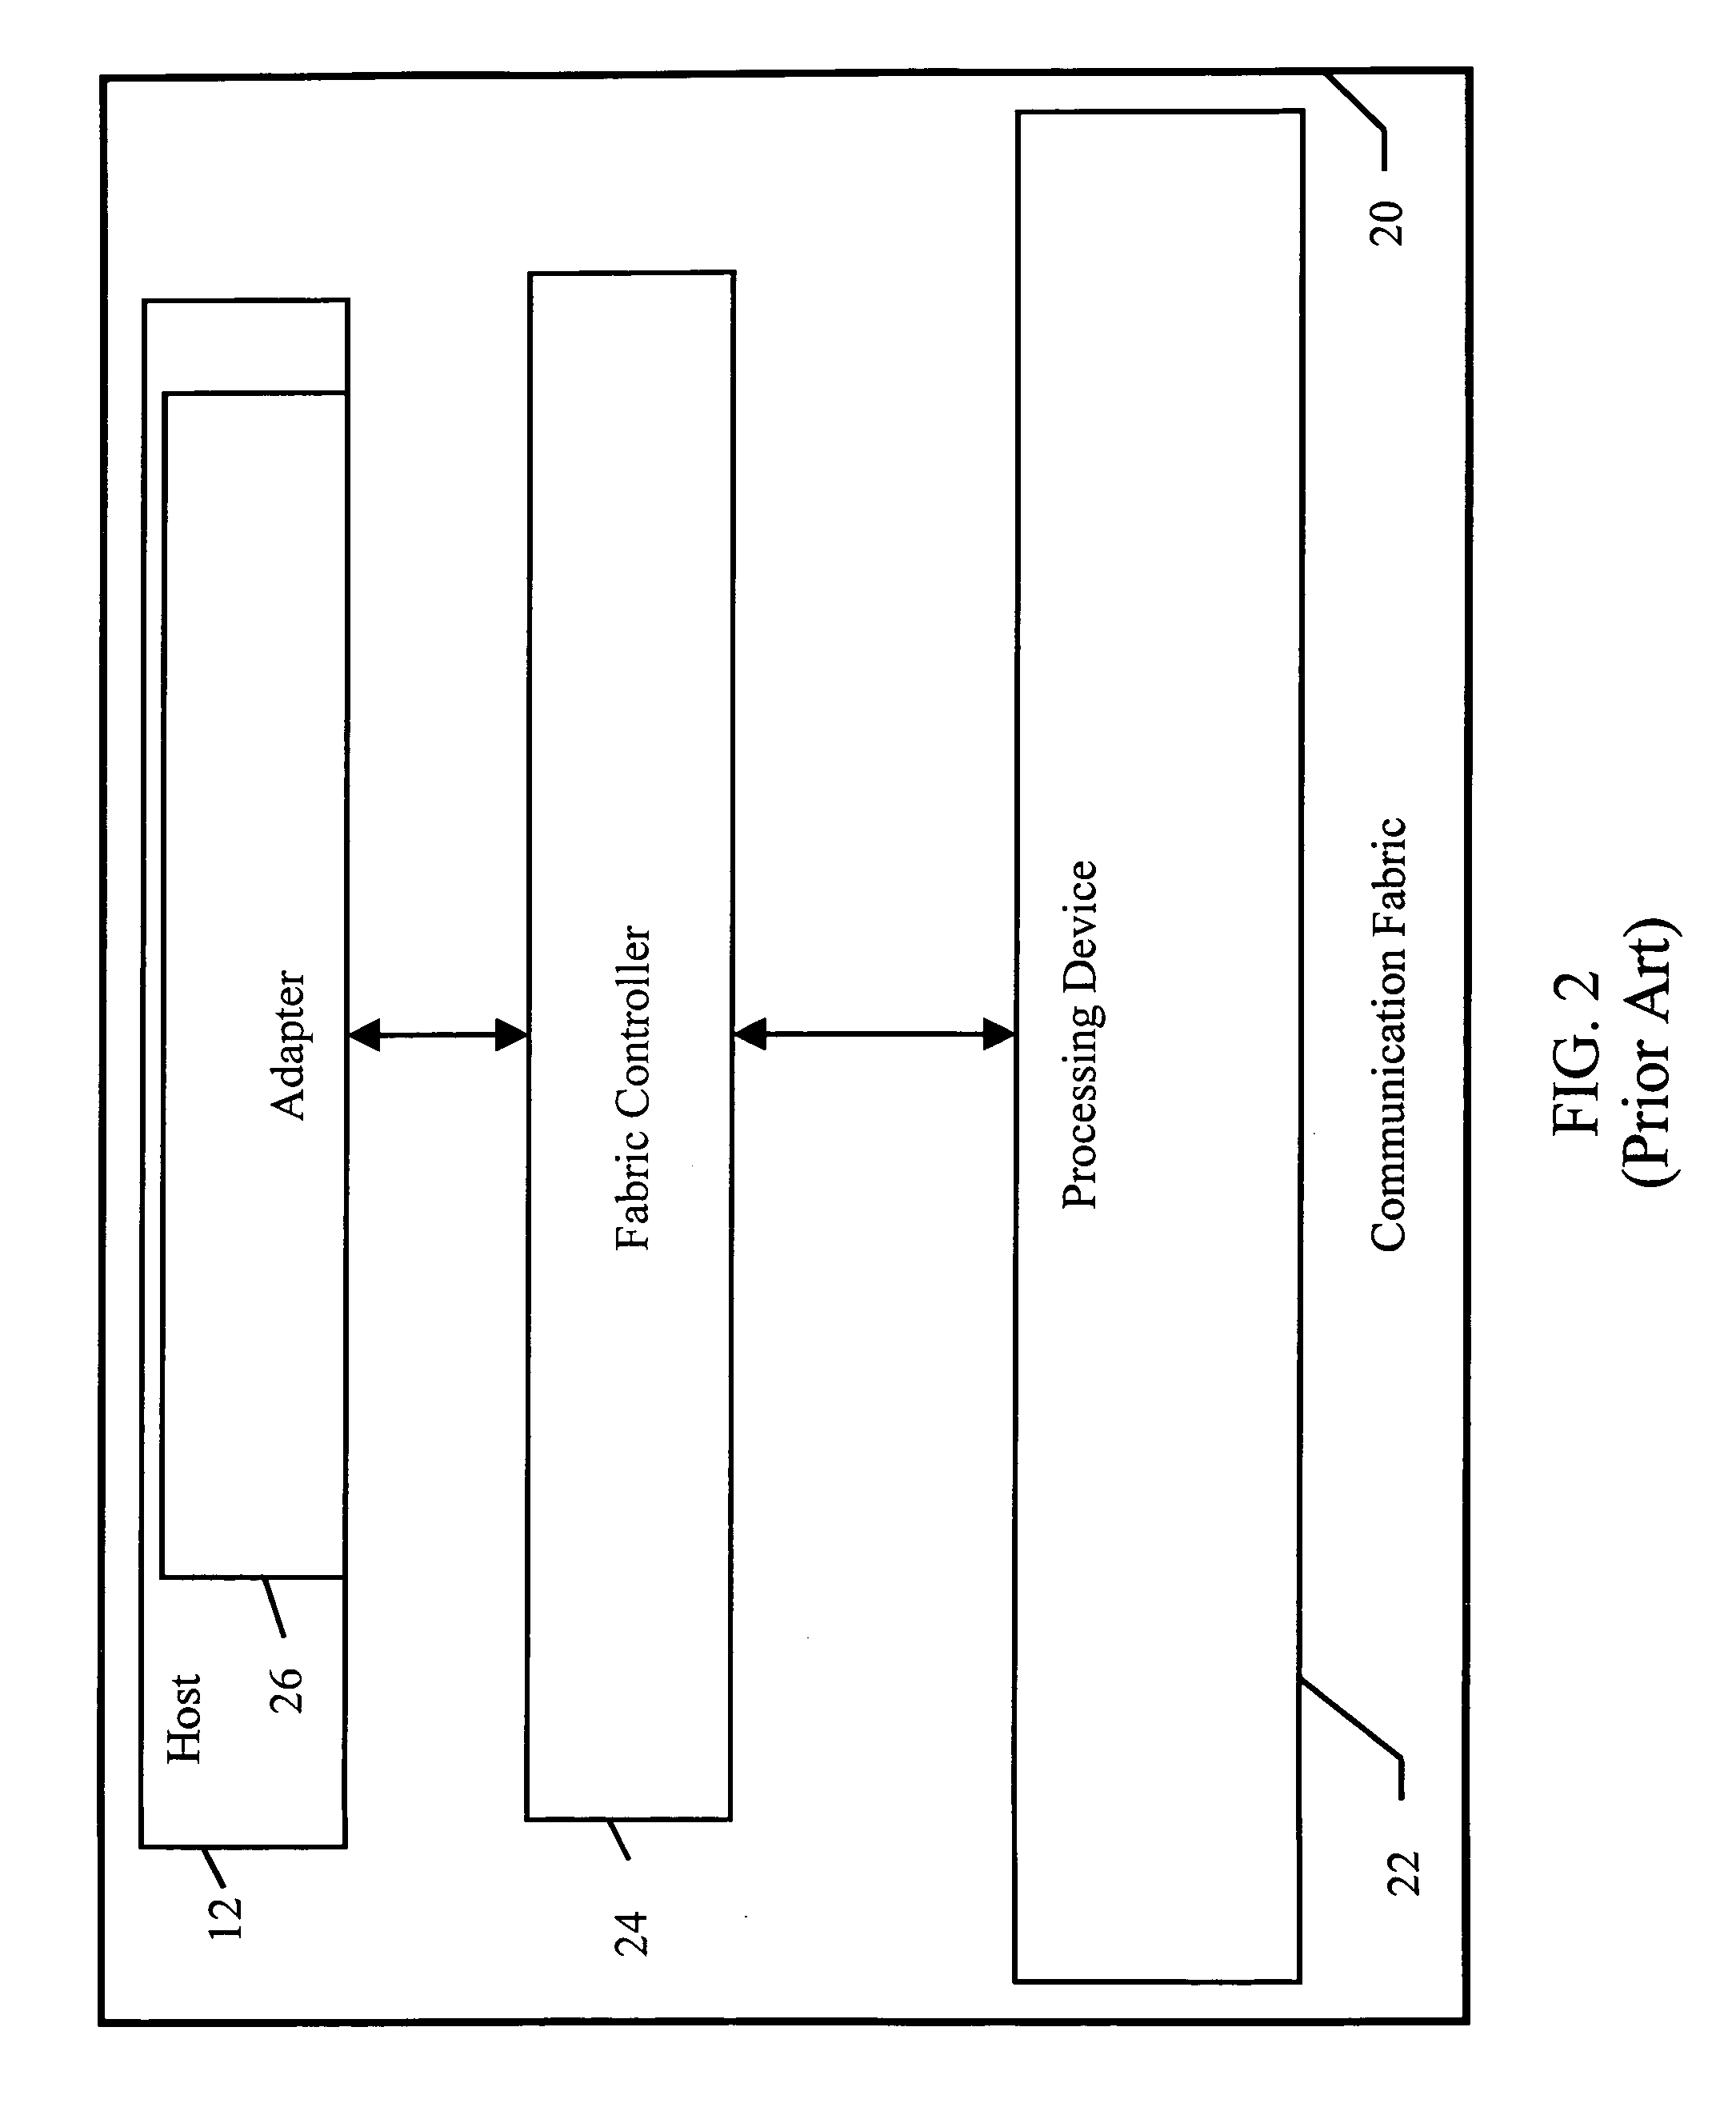 Dynamic threshold scaling in a communication system